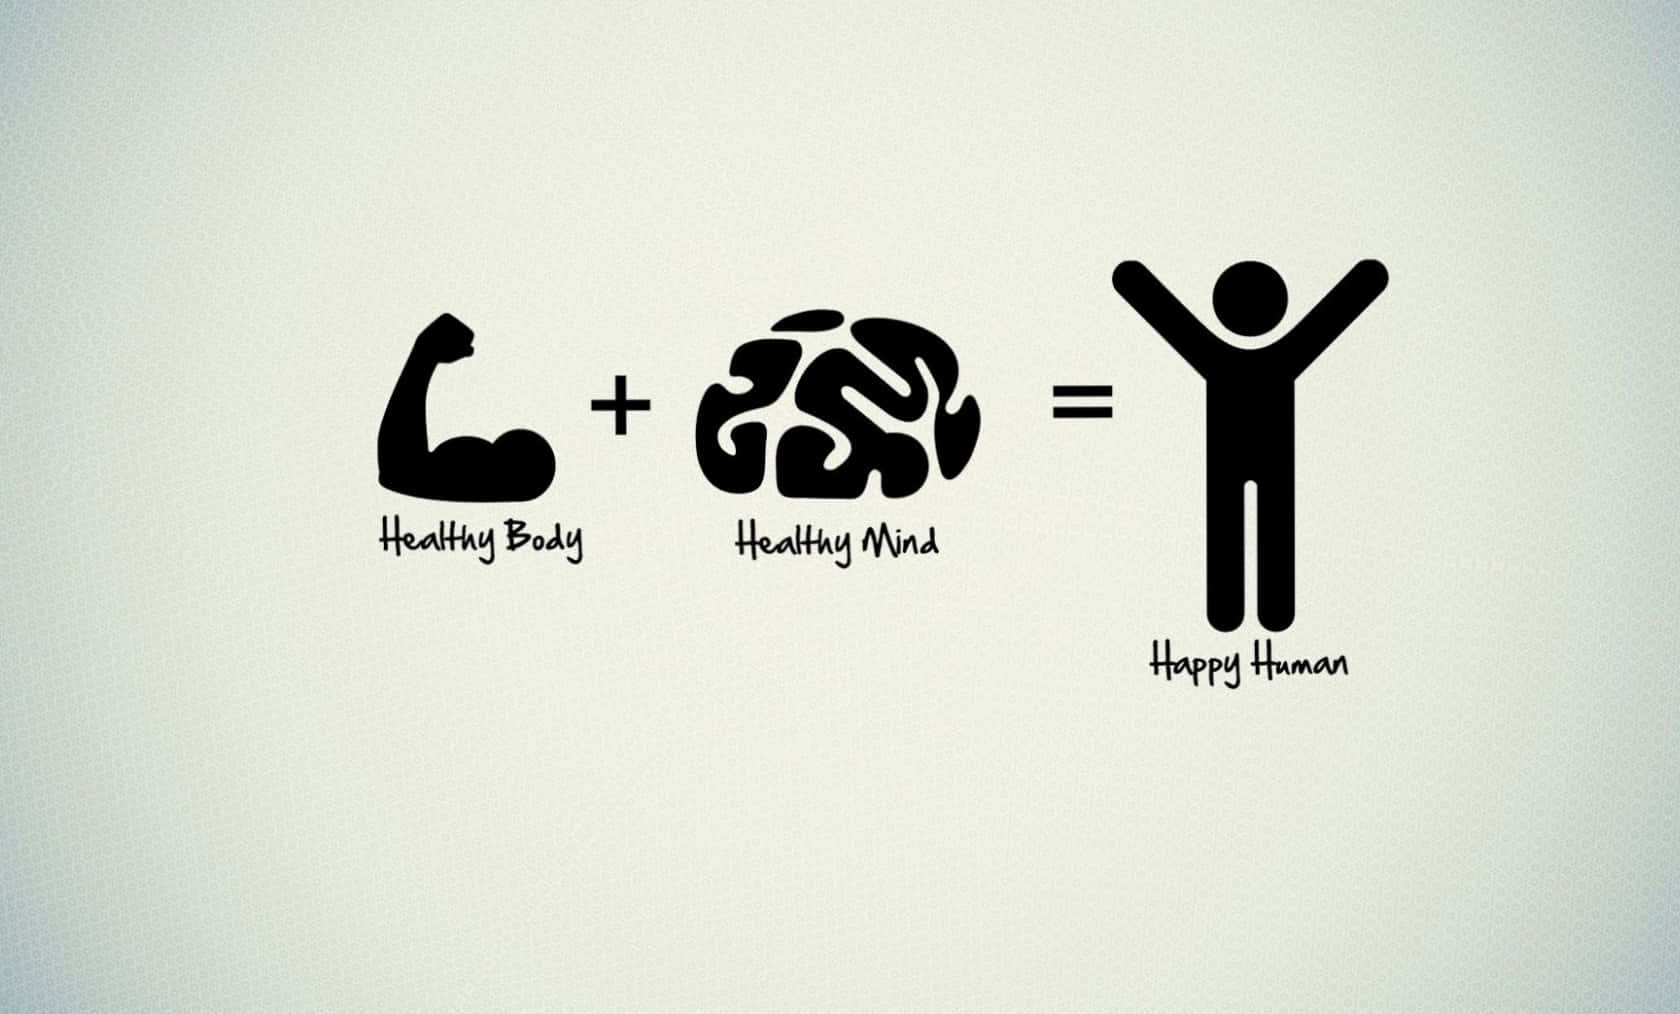 Body And Mind Health Picture